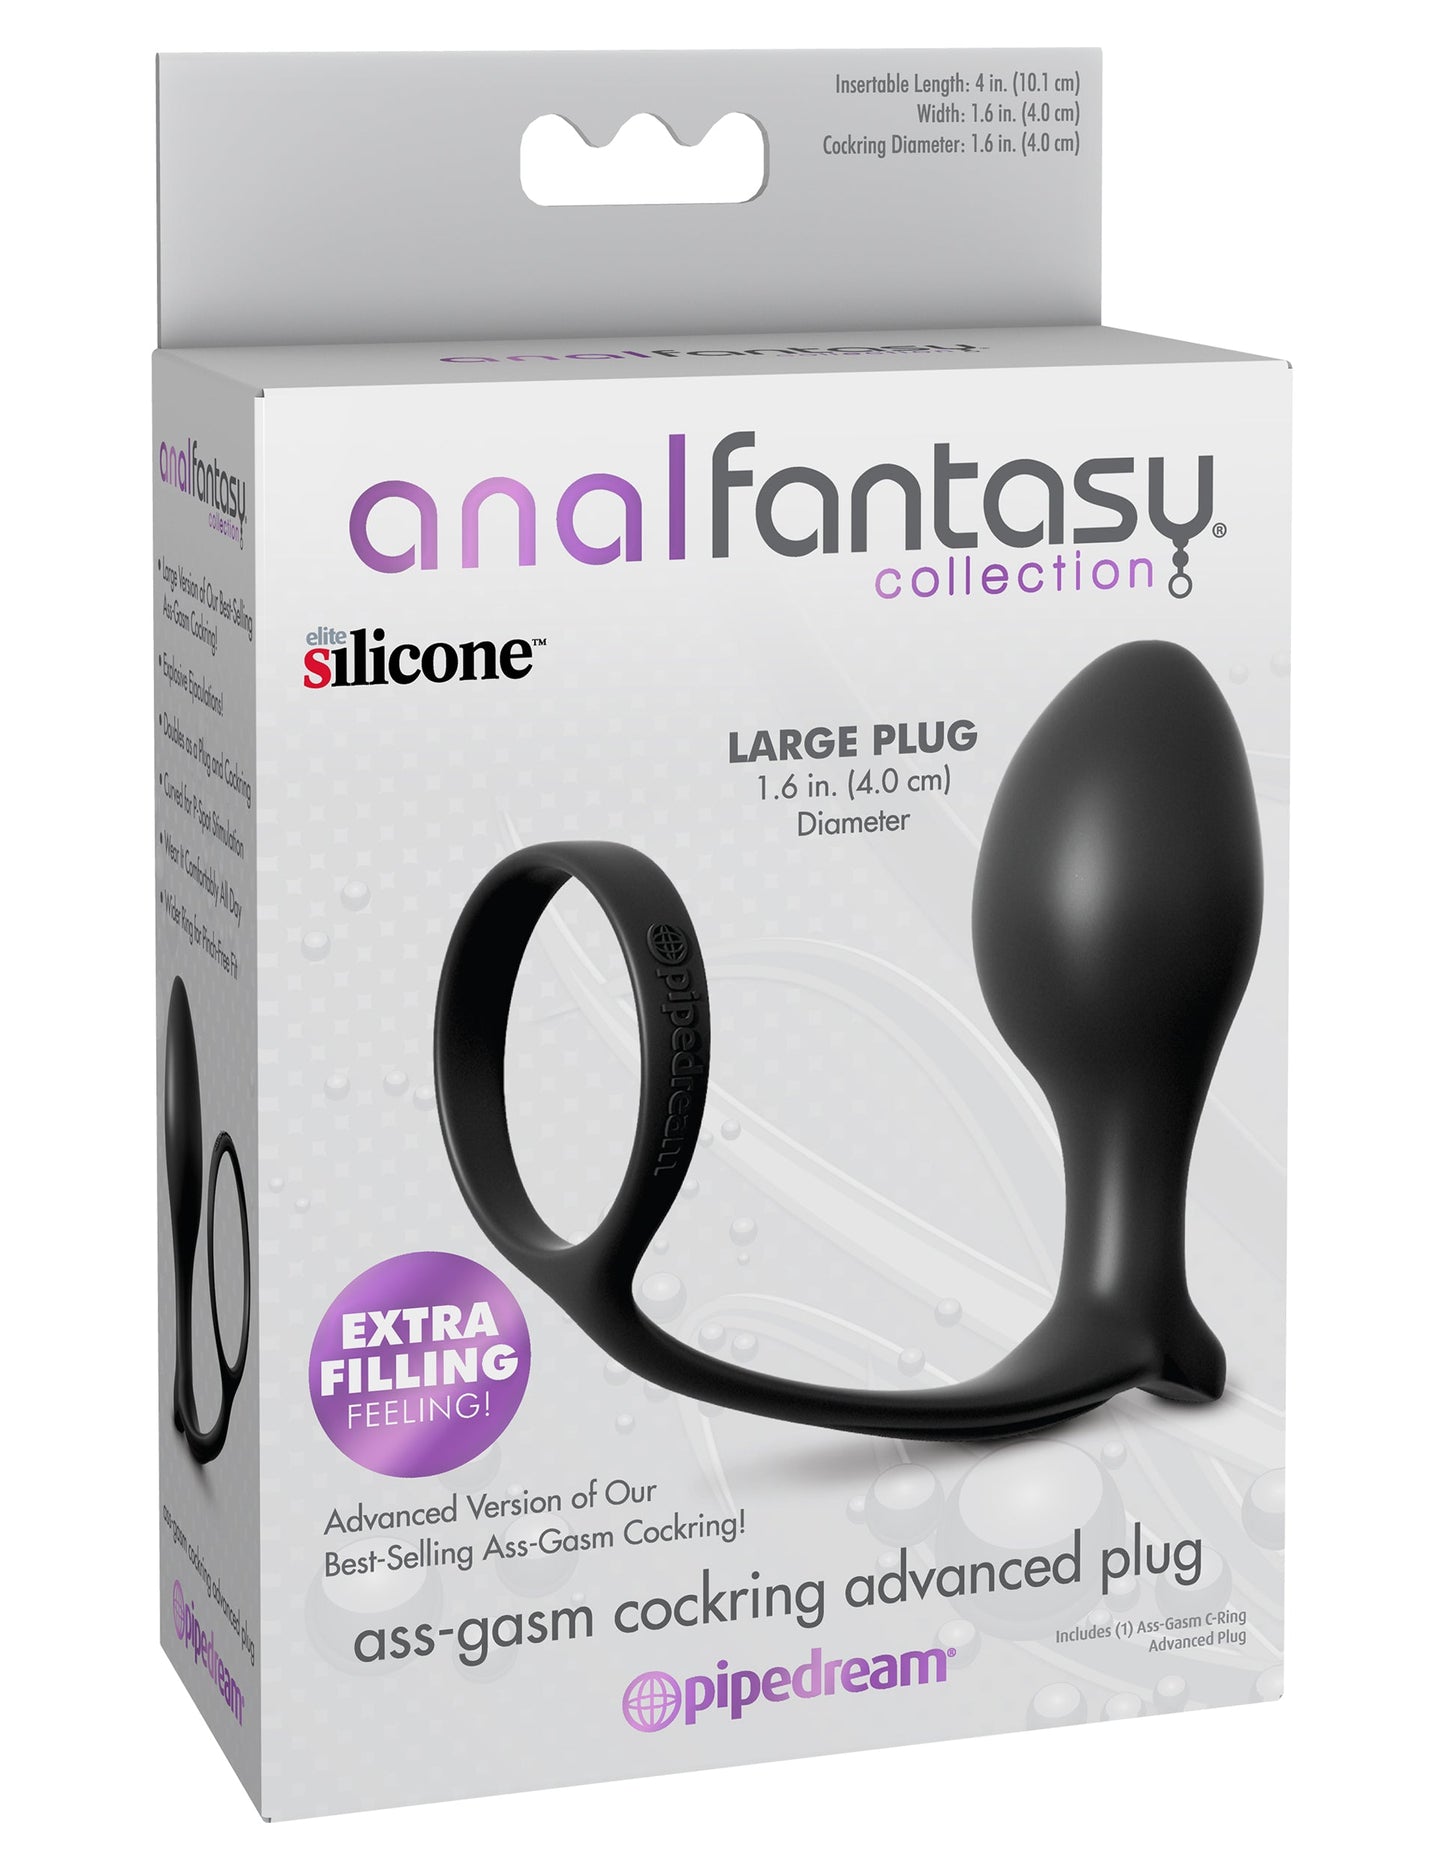 Anal Fantasy Collection | Ass-Gasm Cockring Advanced Plug